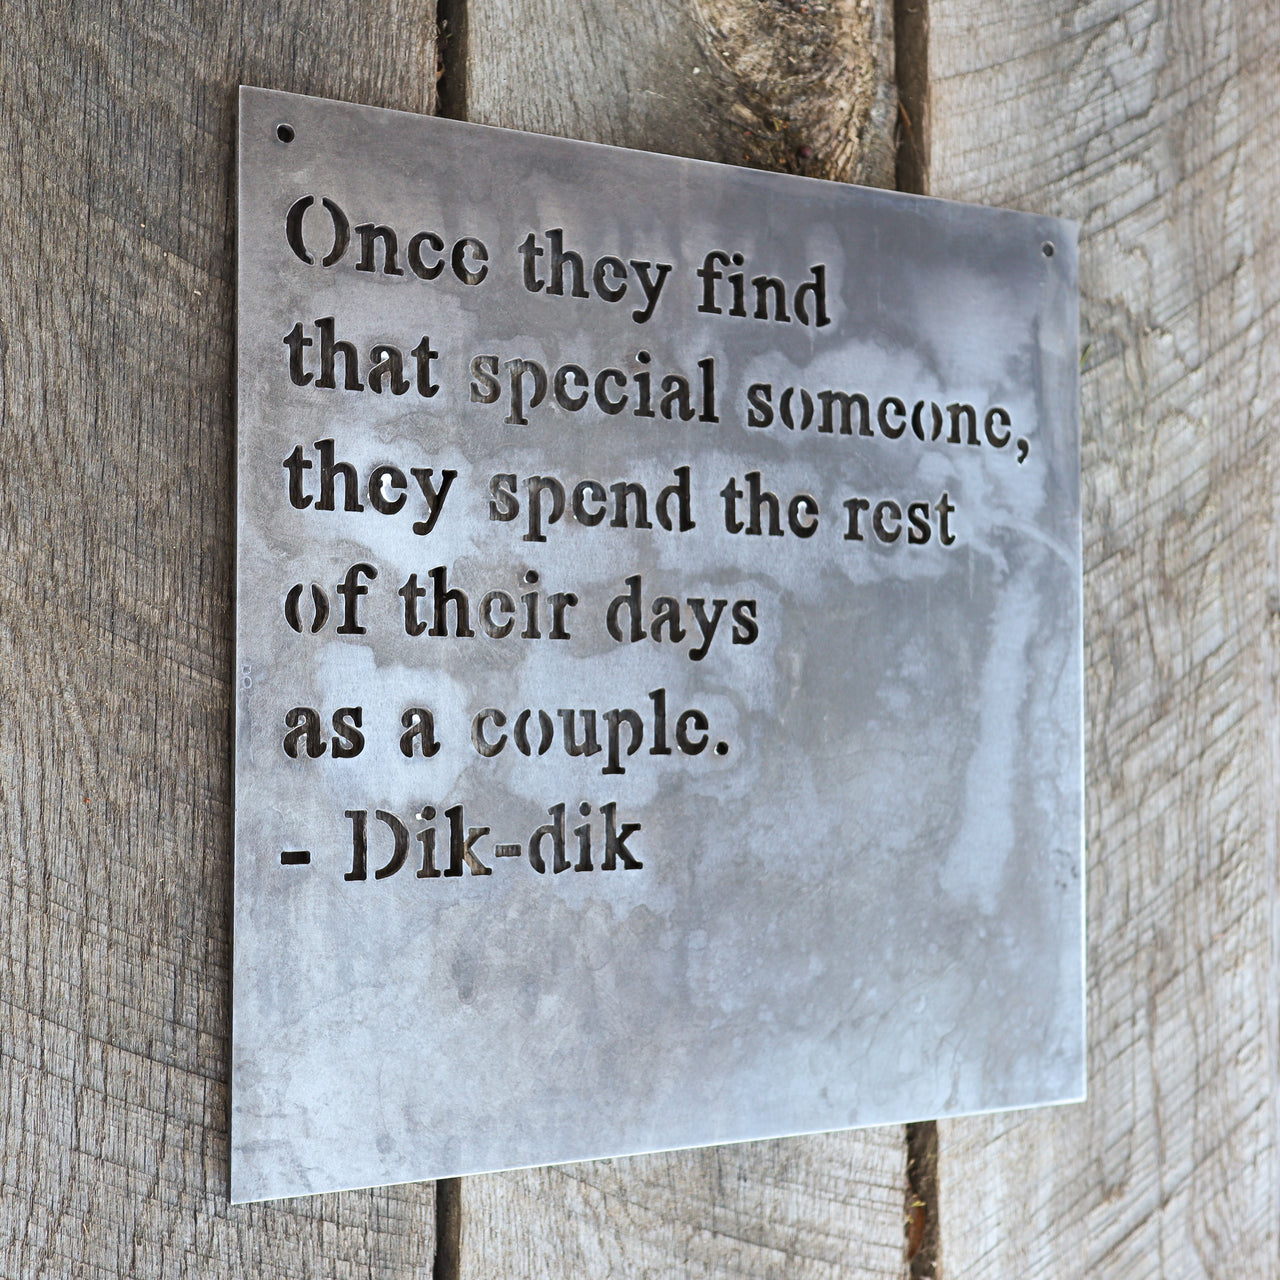 Personal Quote Wedding Sign - Personalized Metal Rustic Decor - Custom Words Wall Art